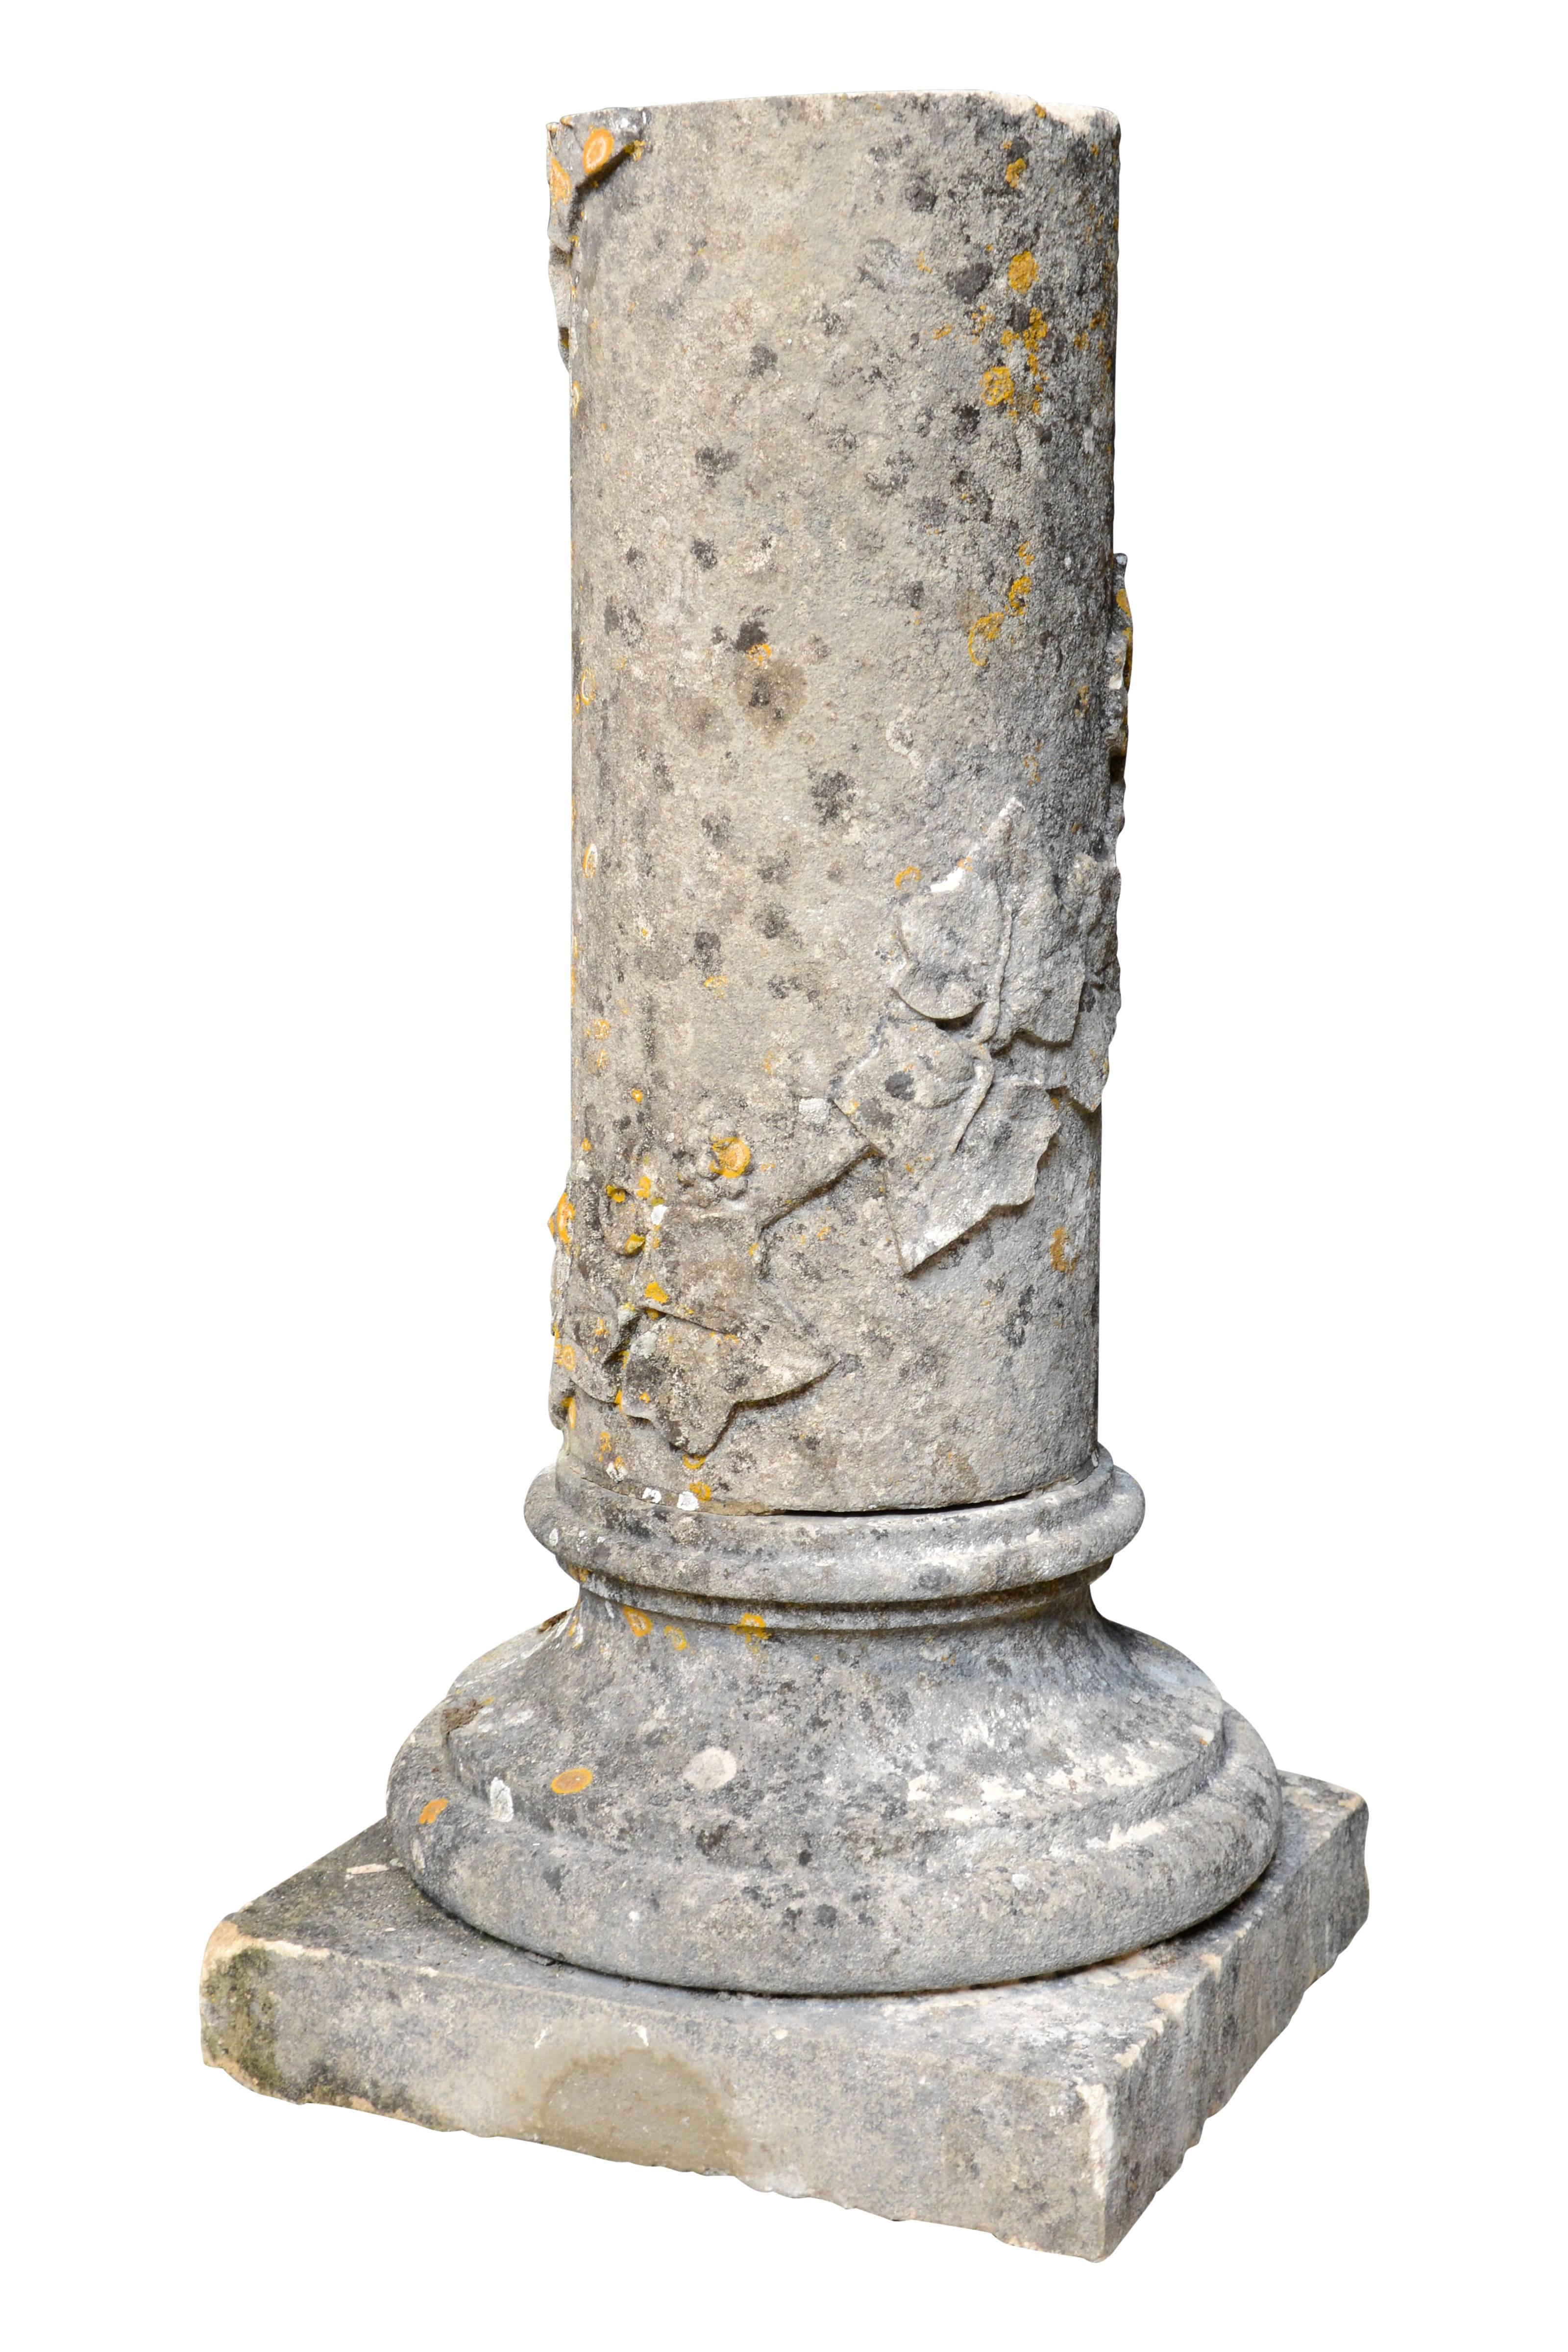 Dated from the 19th century, stone pedestal at the image of Roman column decorated with ivy leaves carved. Dimension of diameter: 10.6 in.